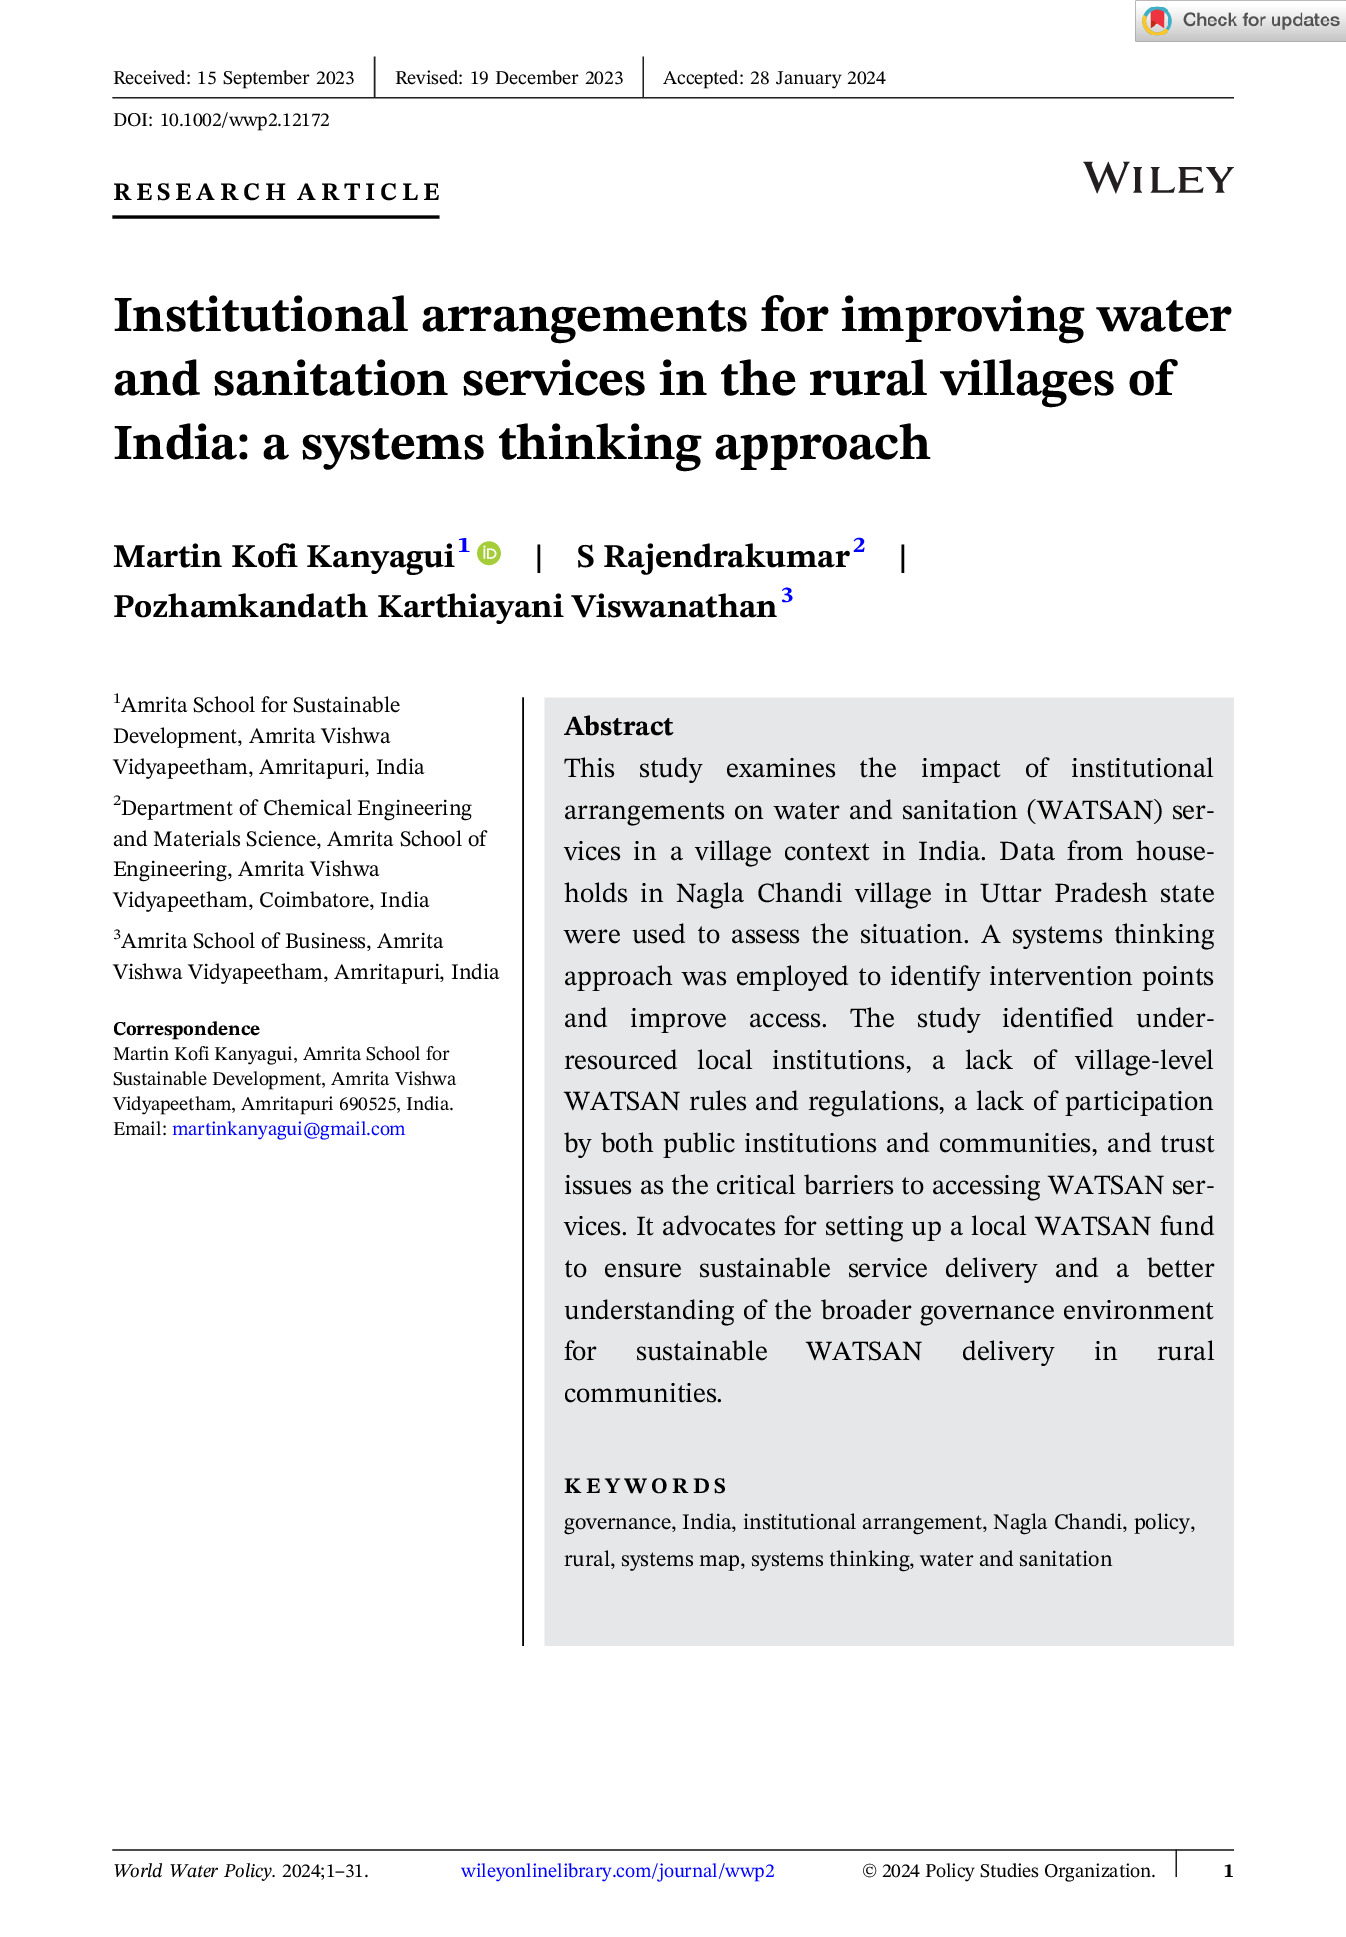 Institutional arrangements for improving water and sanitation services. A systems thinking approach